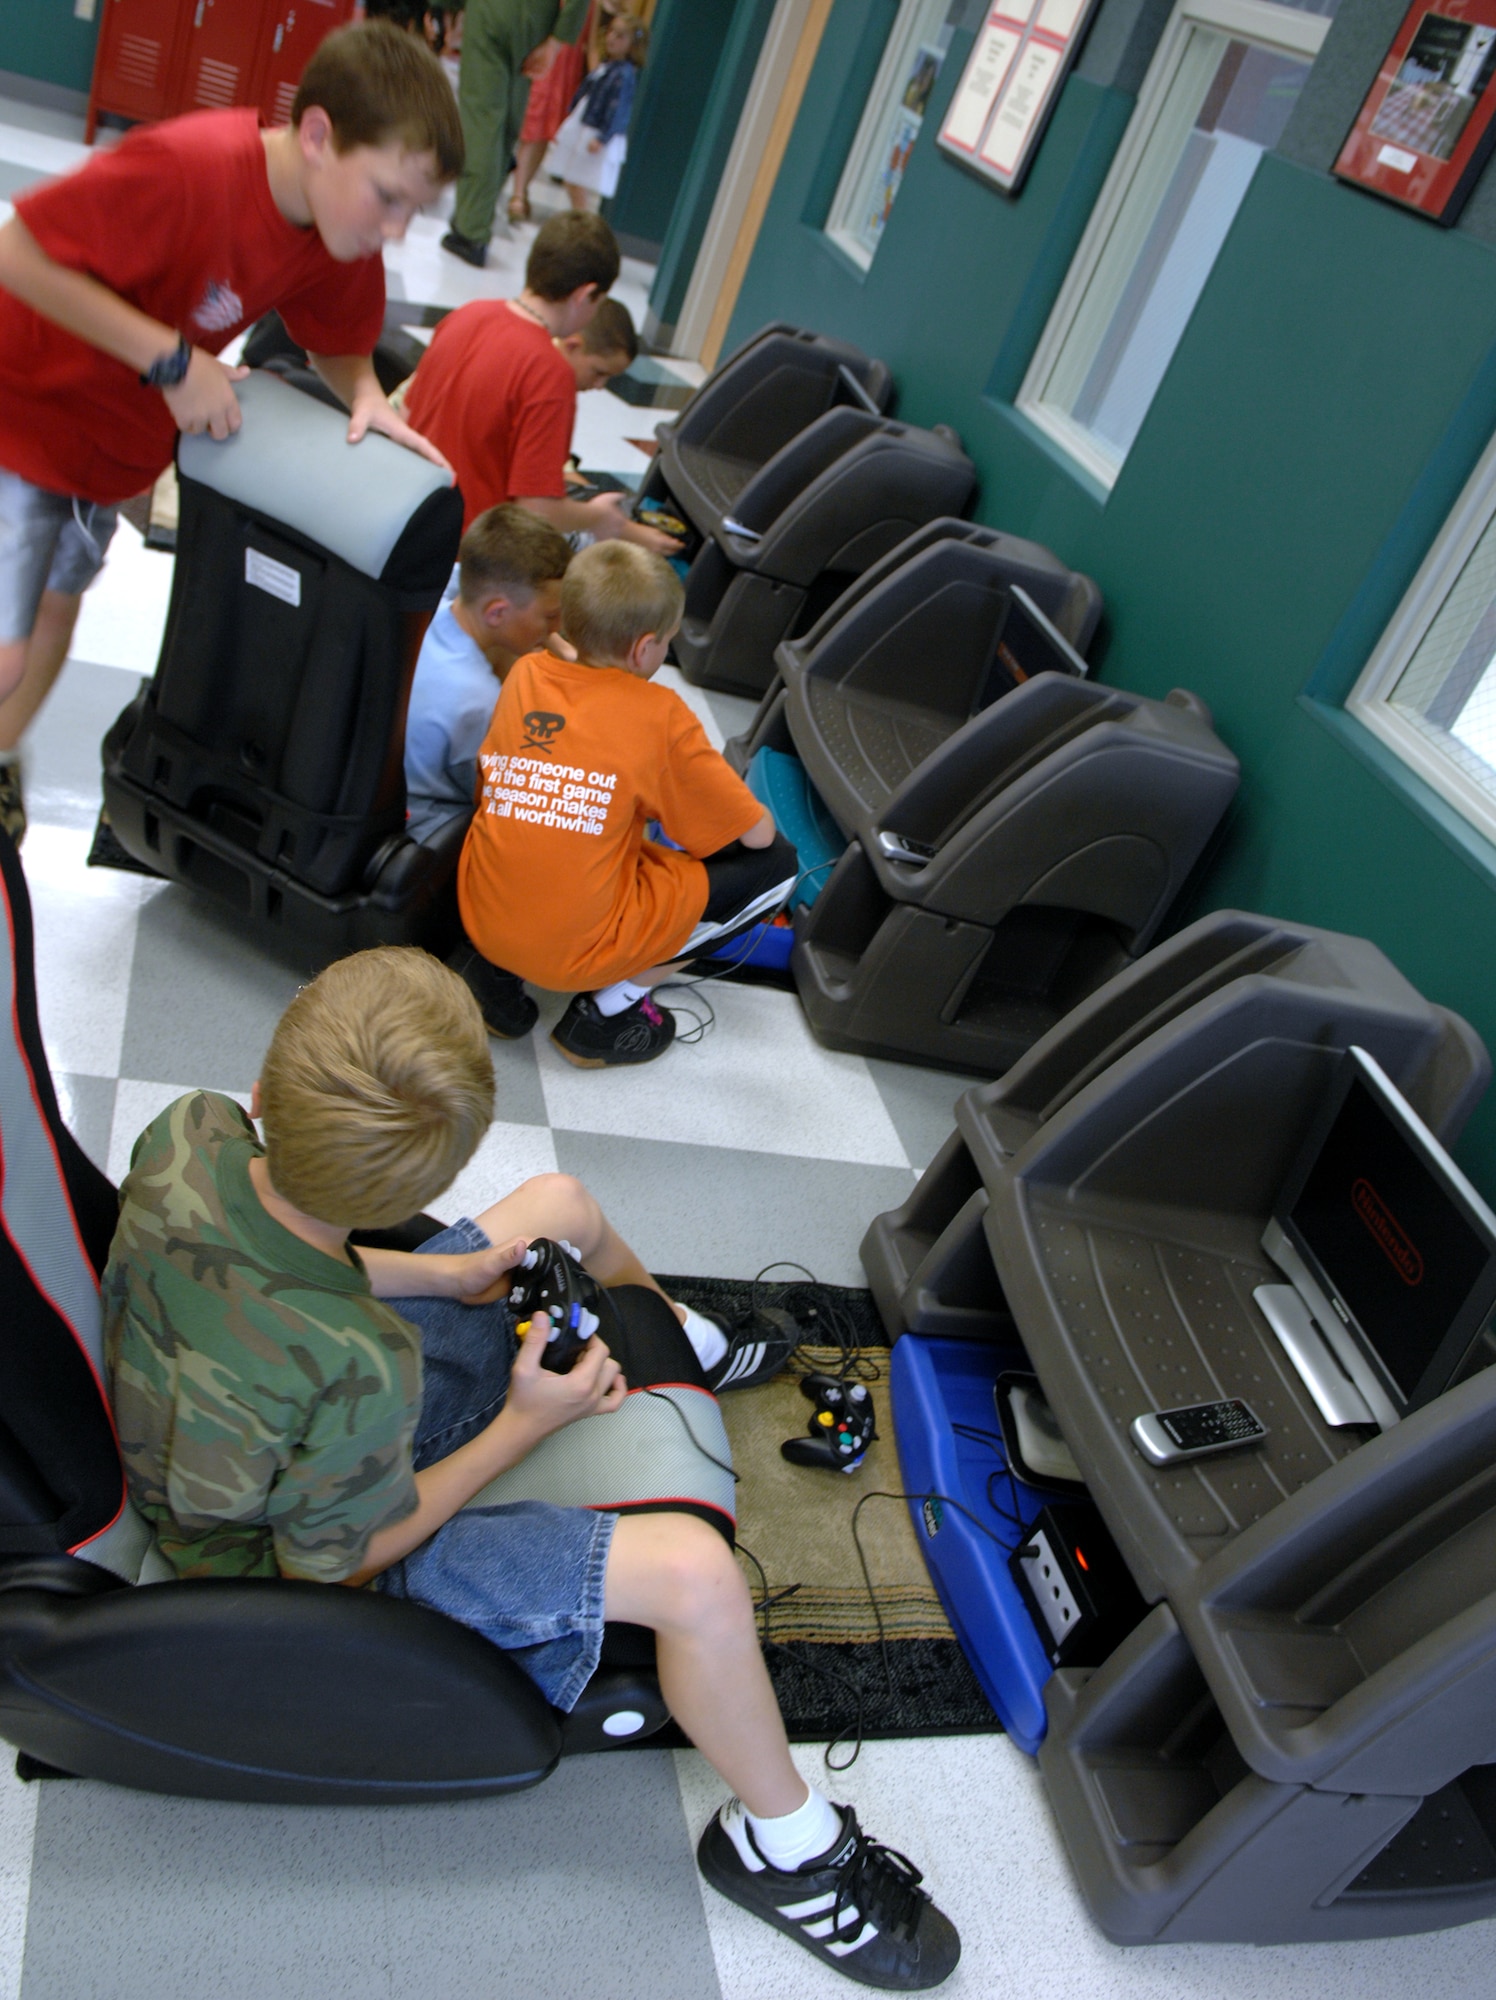 WHITEMAN AIR FORCE BASE, Mo. – Whiteman youth play videogames on several different gaming consoles that the new youth center offers after the ribbon cutting ceremony Aug. 24. The youth center’s mission is to provide a safe, high-quality youth development program in an environment that is both nurturing and stimulating. (U.S. Air Force photo/Airman 1st Class Stephen Linch)